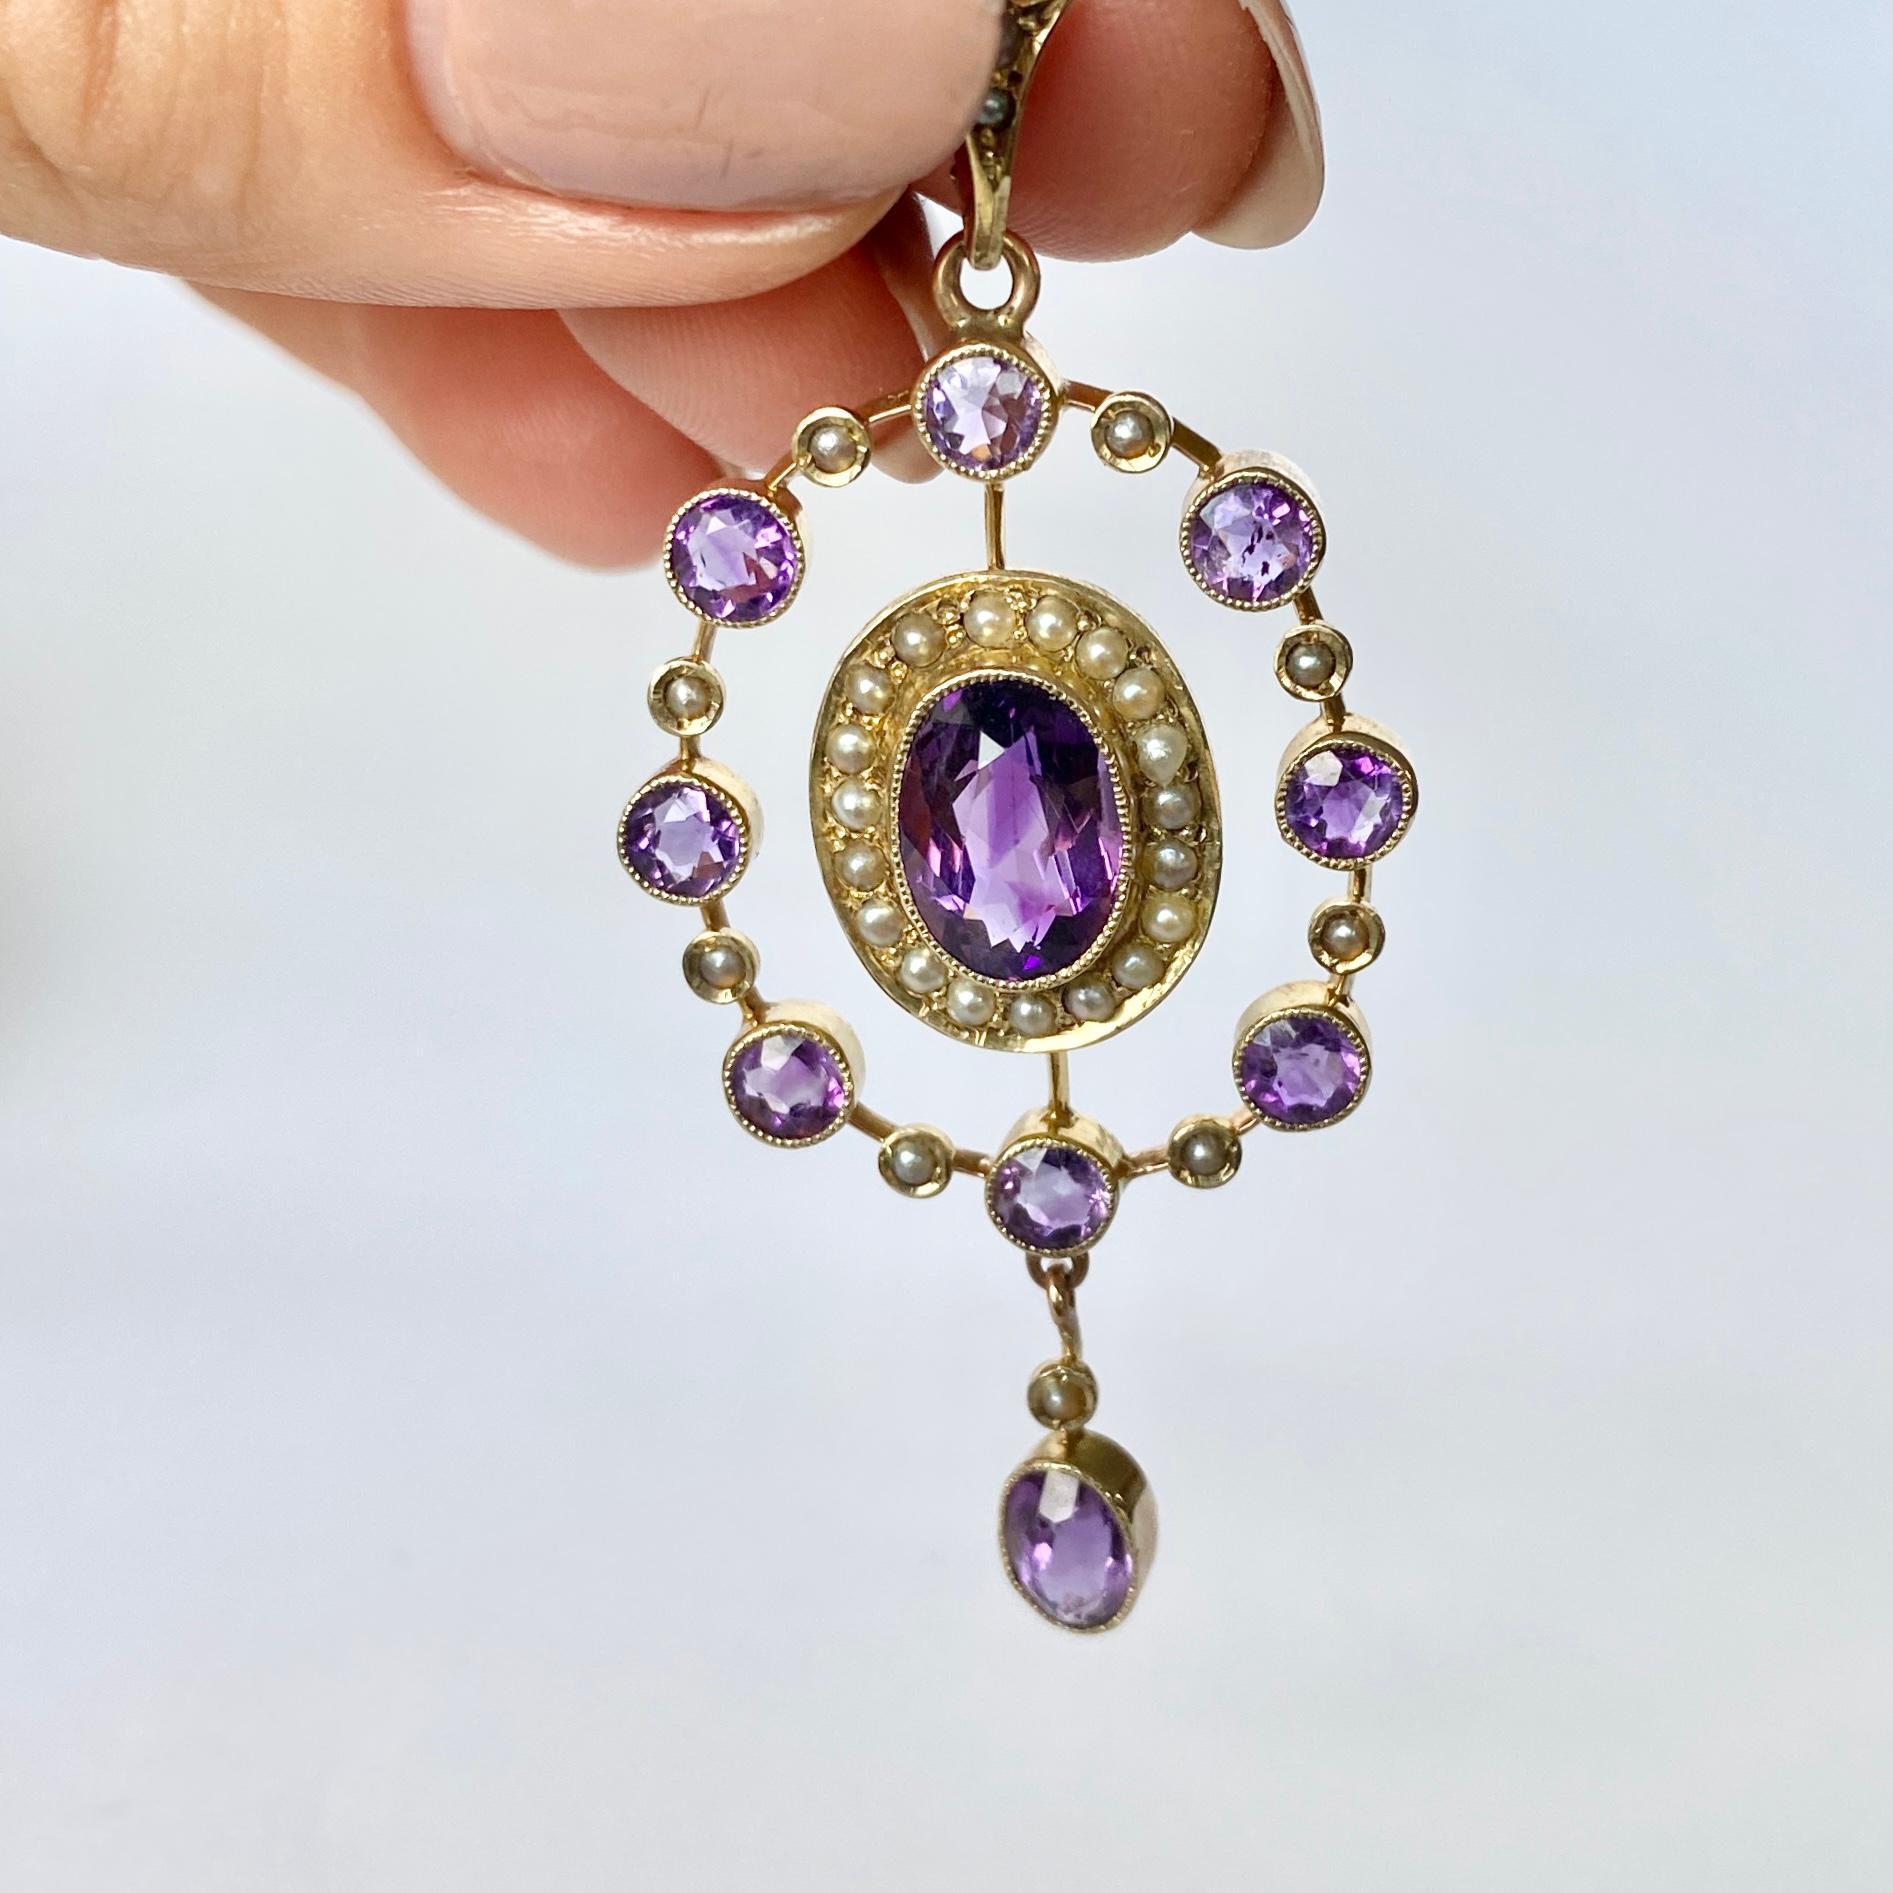 The style of this pendant is so delicate with the fine metal work and is beautifully decorated with pearls and amethyst. The central round amethyst measures 2ct.  Modelled in 9carat gold. 

Pendant Drop From Loop: 56mm

Weight: 5g 